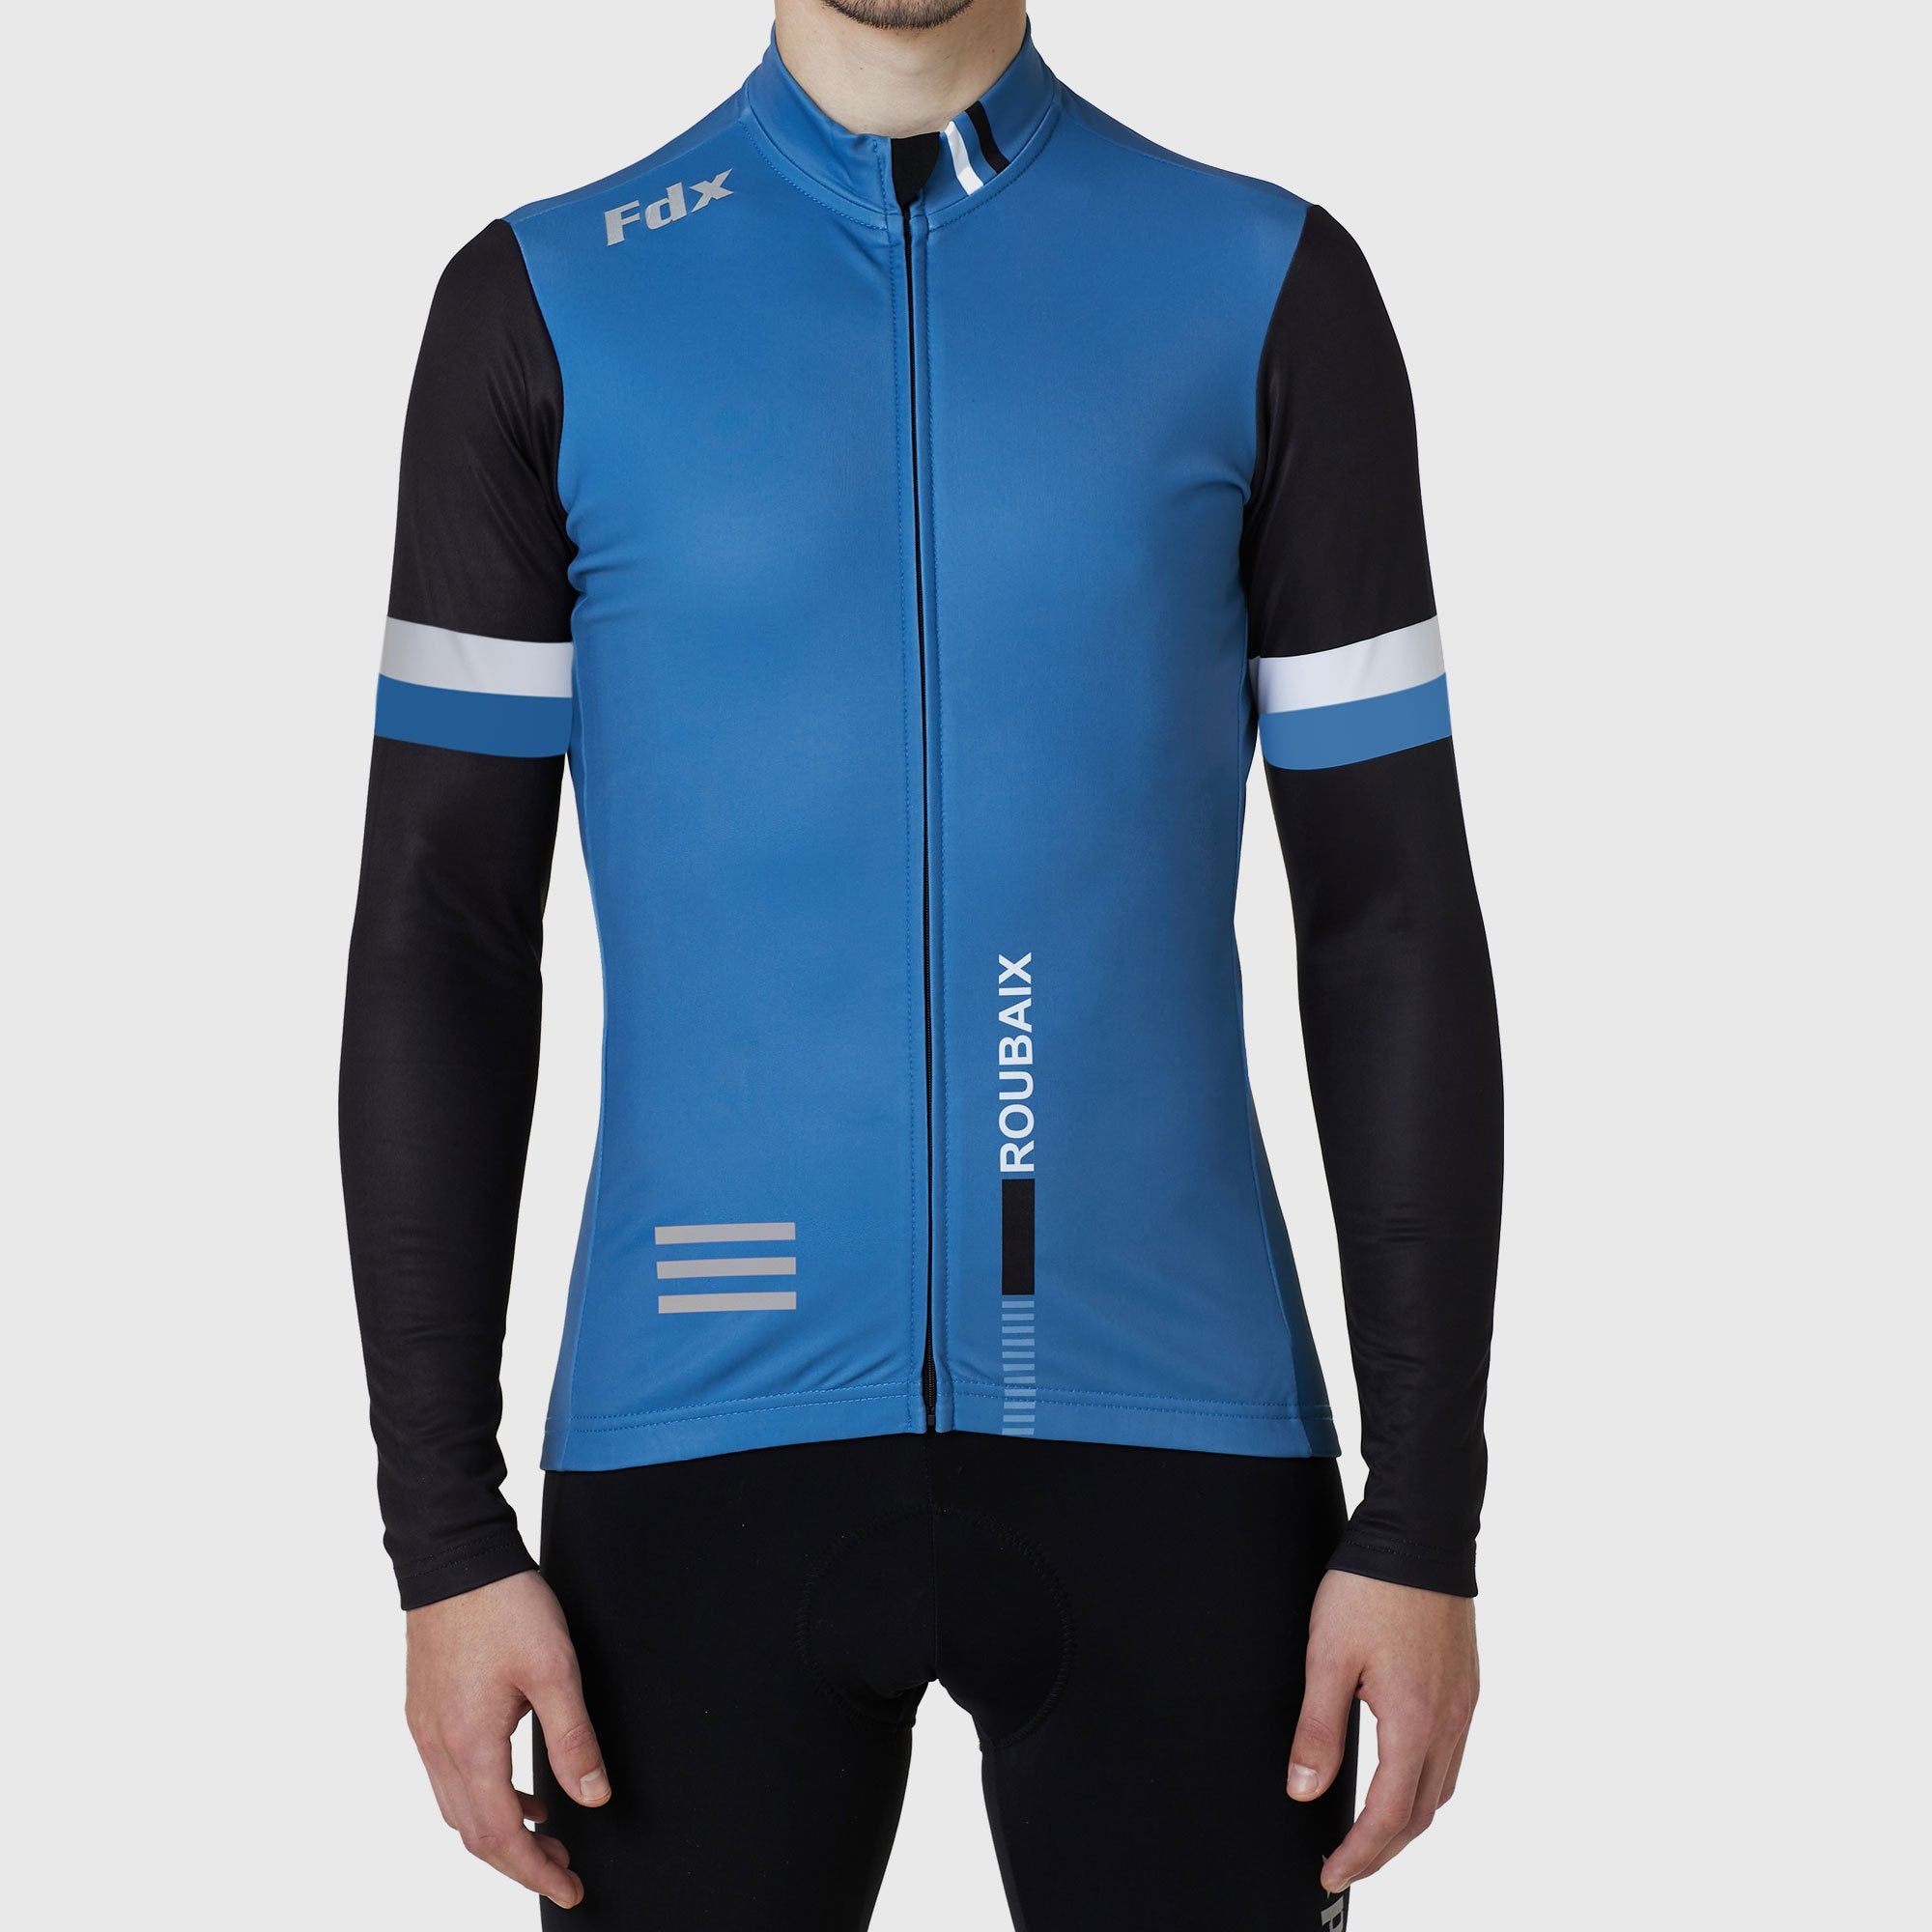 Fdx Limited Edition Cycling Long Blue US - FDX | Sports Sleeve Men\'s Sports® FDX Thermal Jersey